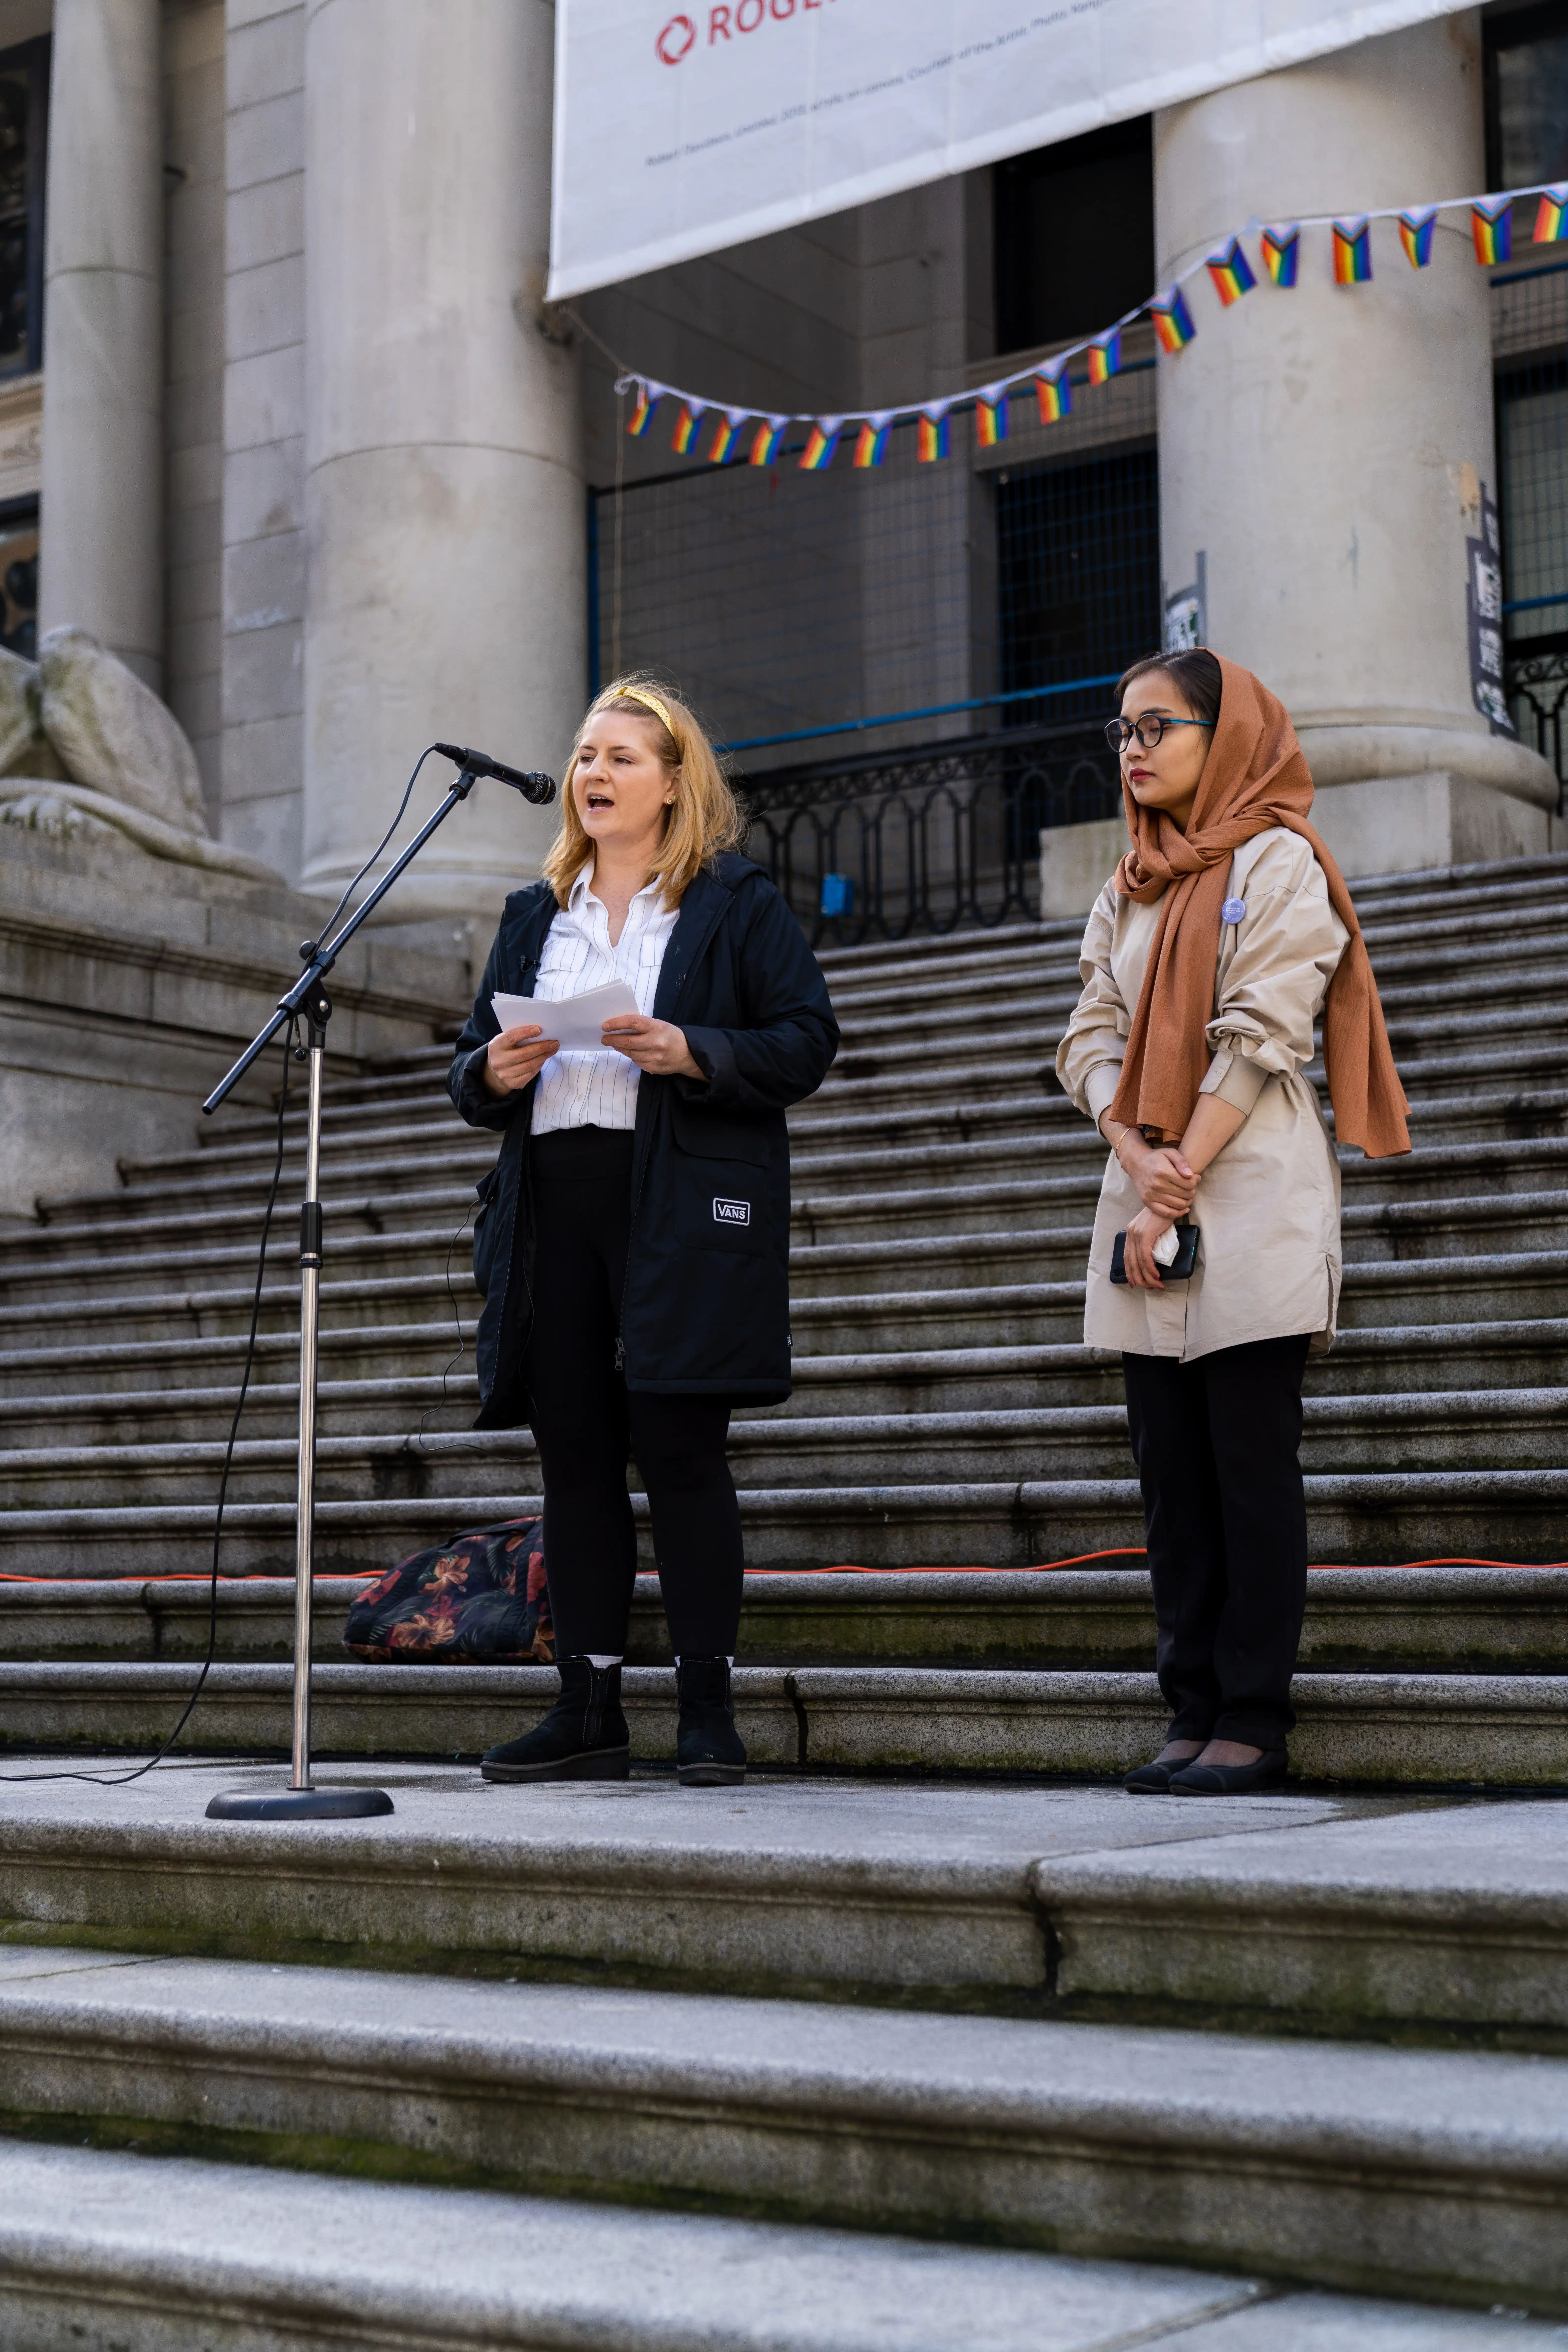 This is an image of Lauryn Oates and Sahar Maqsoodi, speaking to the crowd. They are speaking into a microphone on large stone stairs outside. 